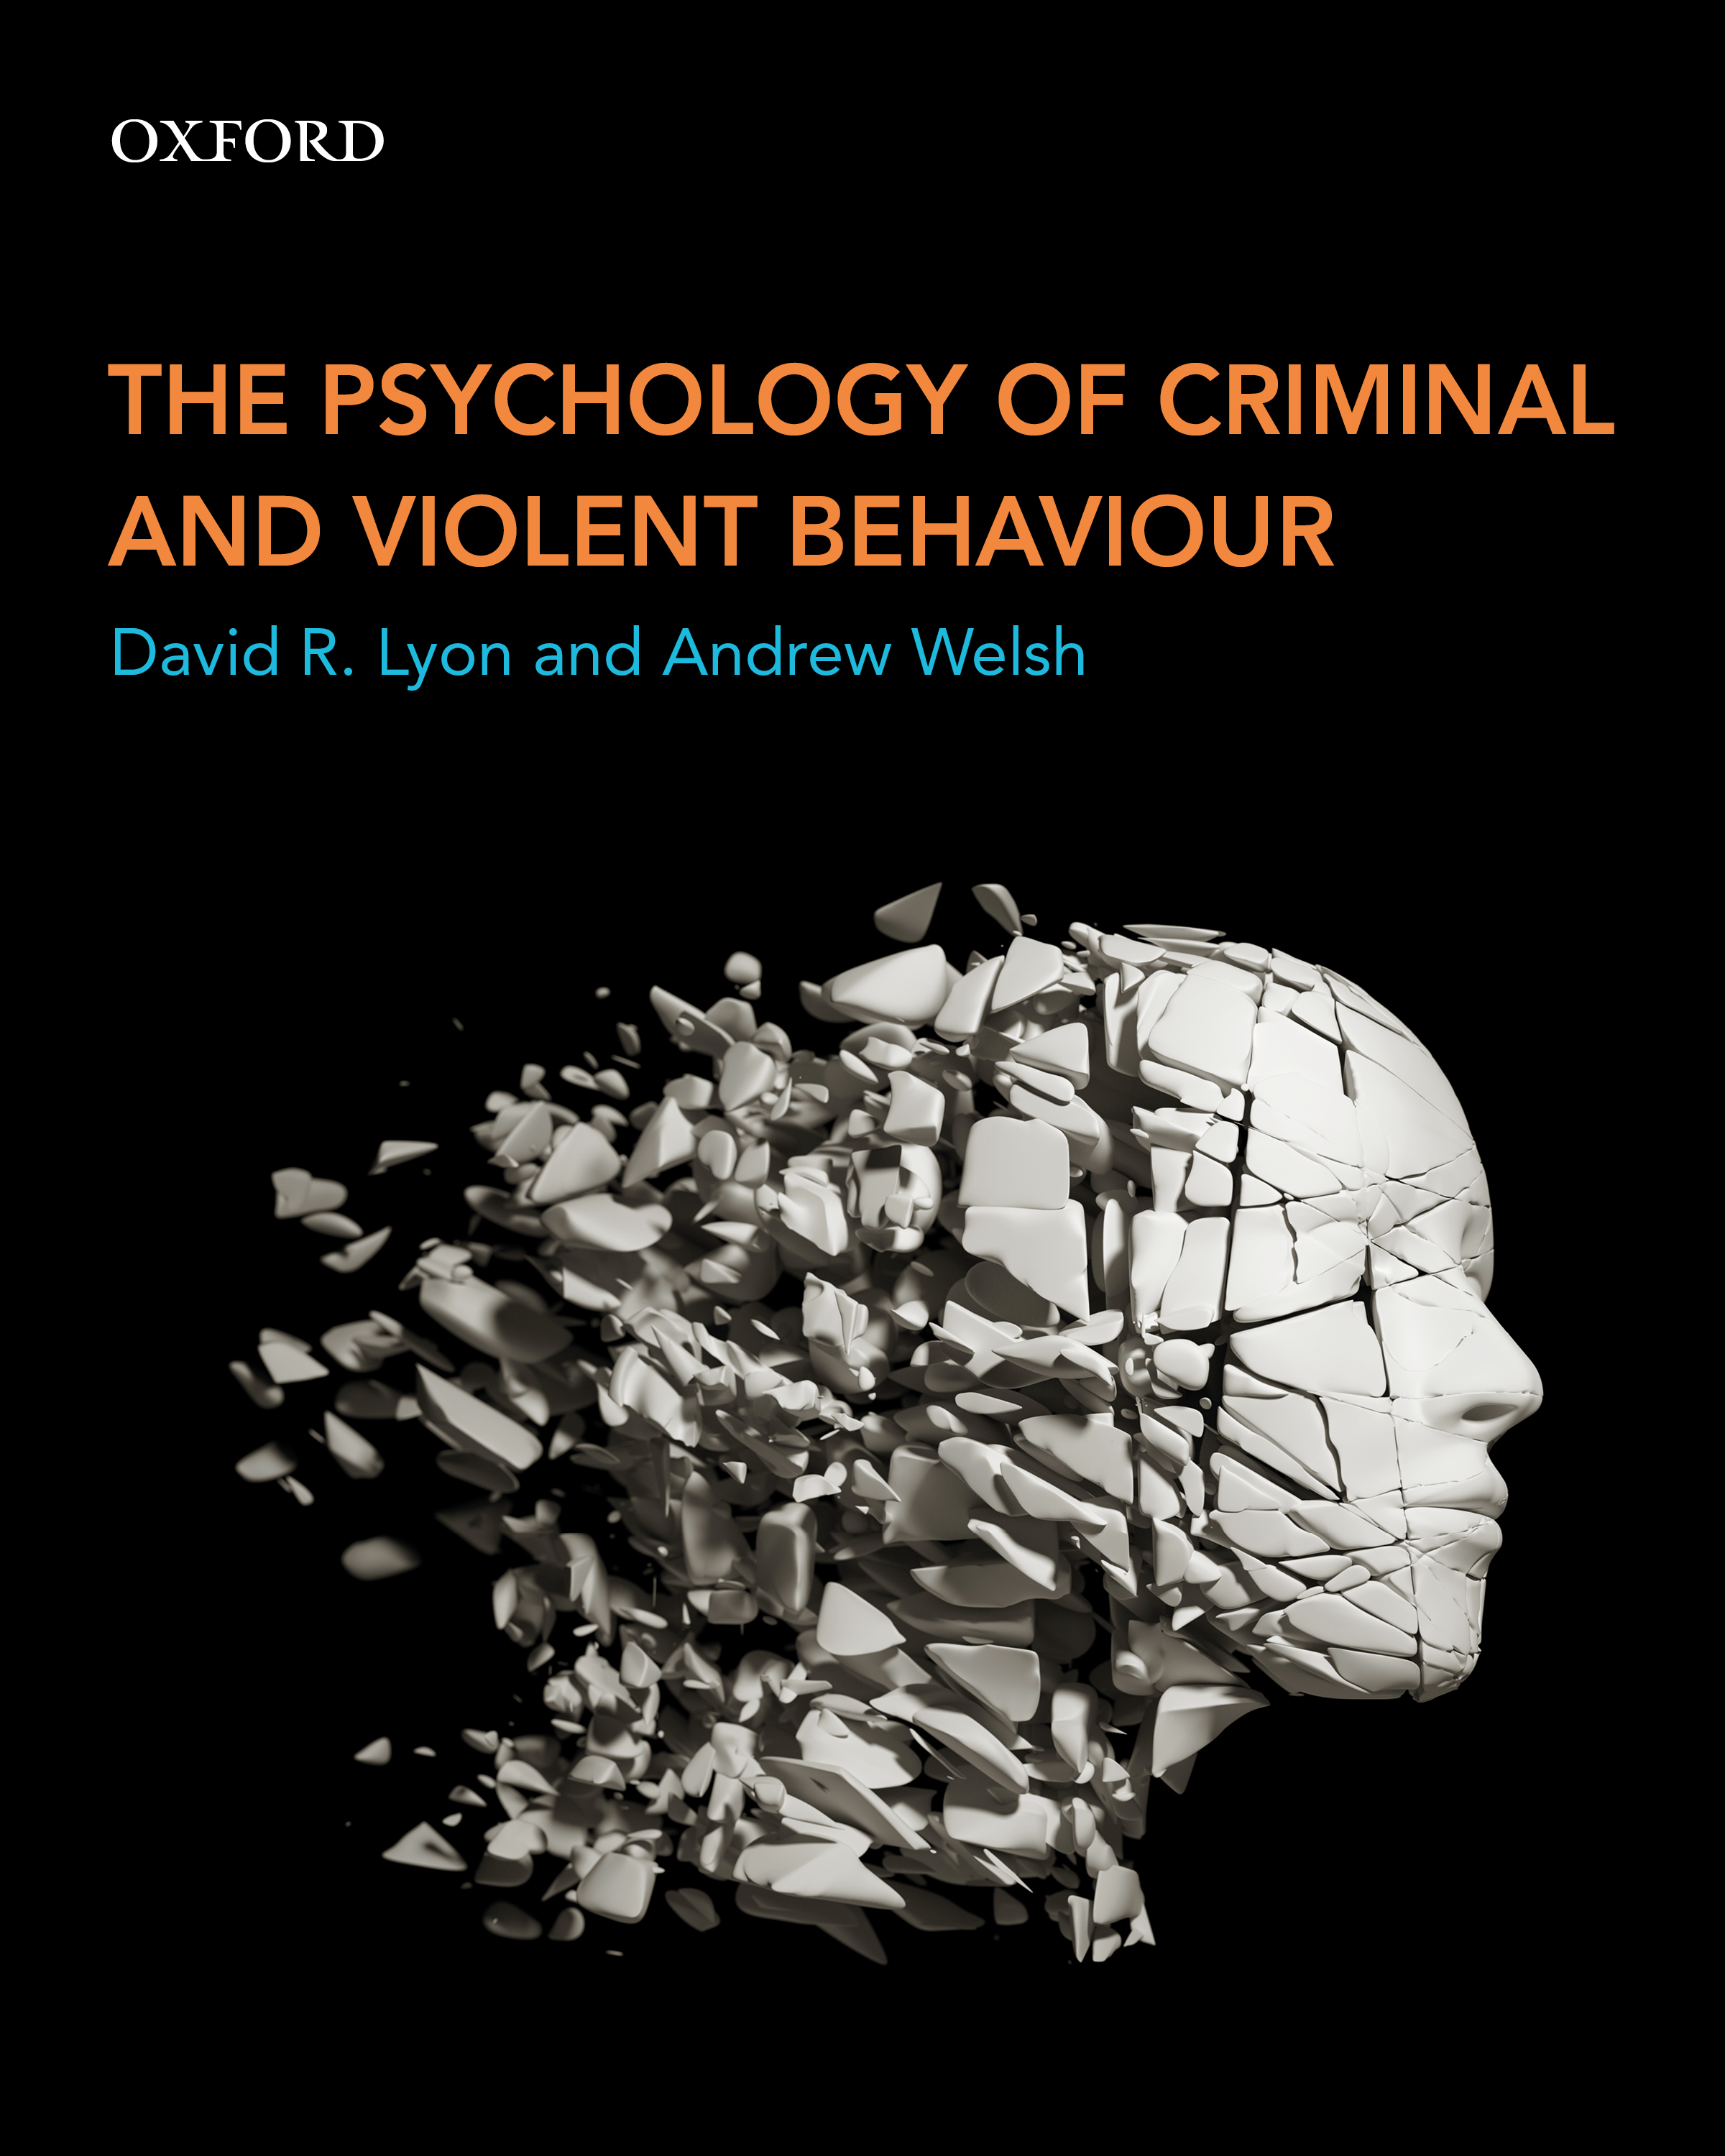 research topics related to criminal psychology